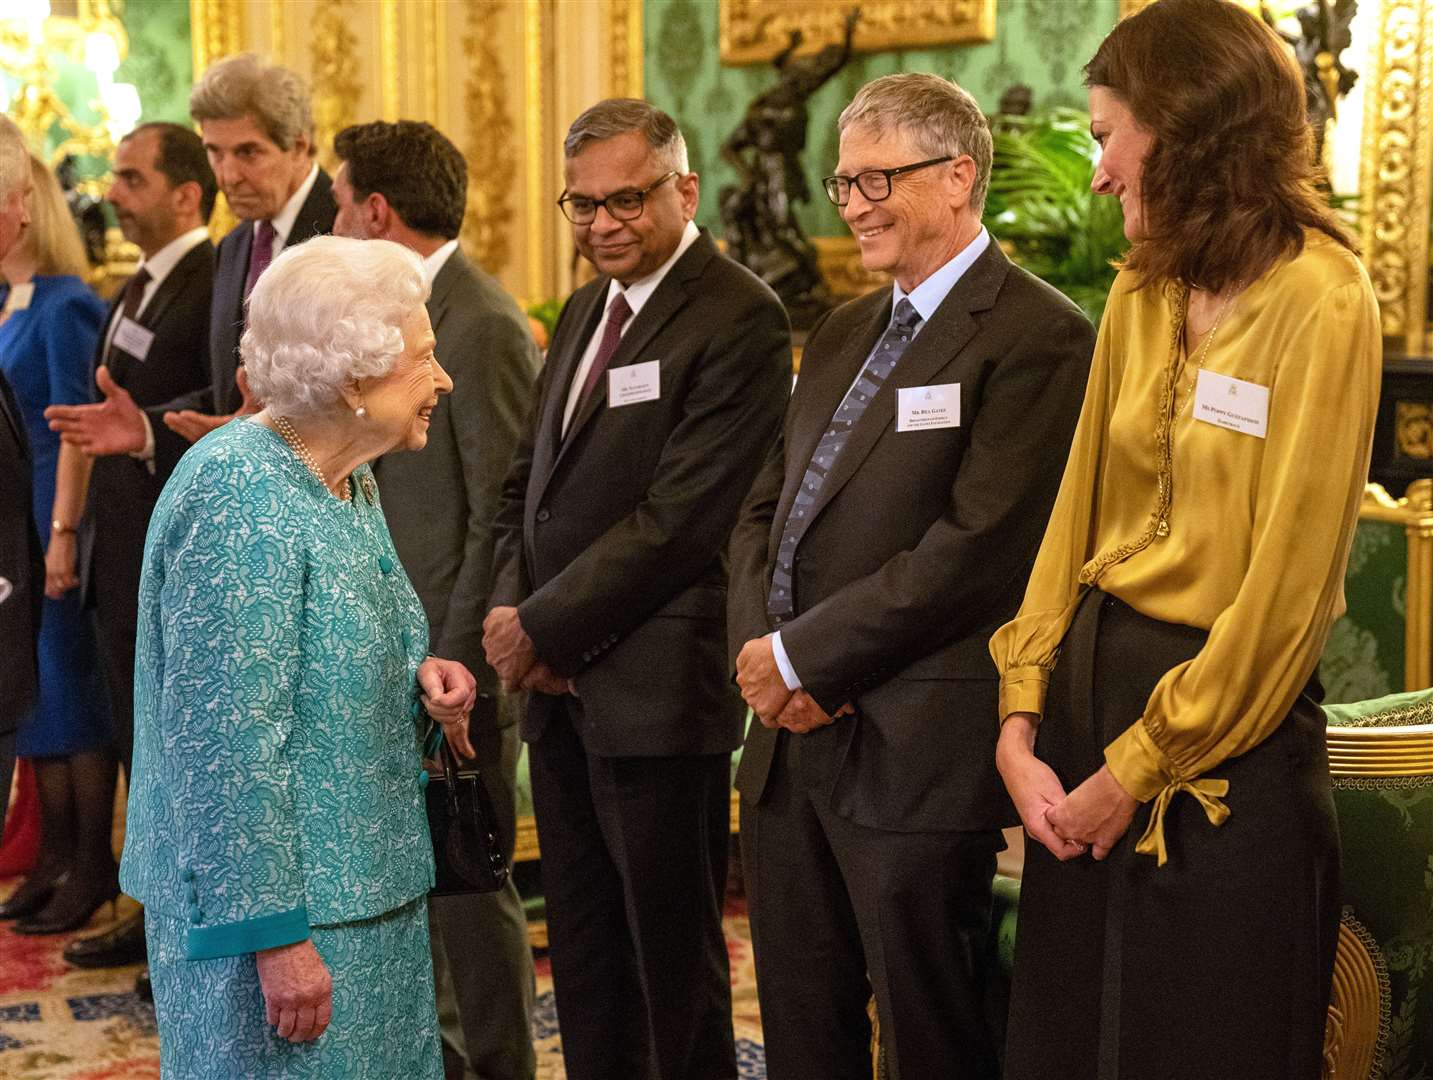 The Queen greeting Bill Gates at the reception on October 19 (Arthur Edwards/The Sun/PA)